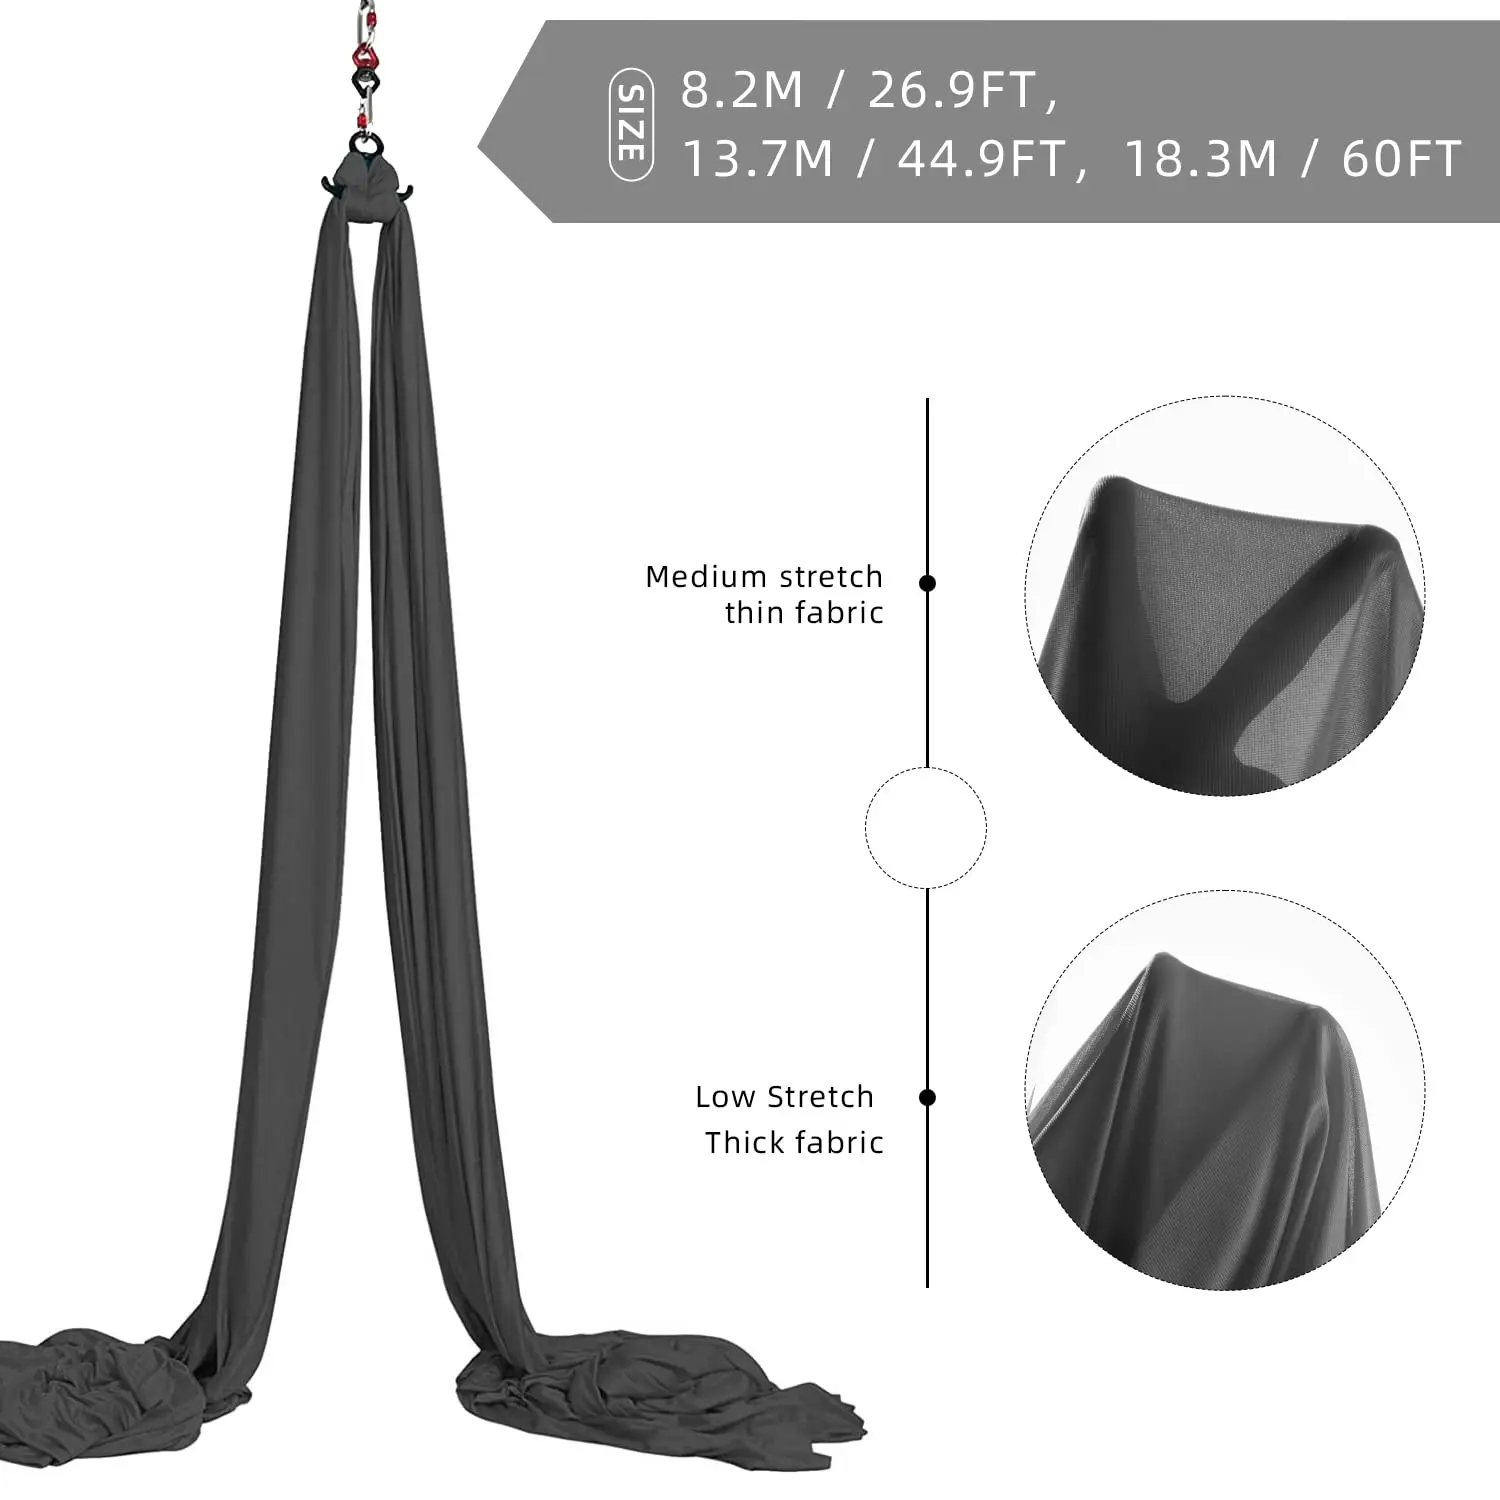 PRIOR FITNESS 15 Yards 13.8m Aerial Silks Kit Aerial Yoga Hammock Set with Hardware for Acrobatic Flying For Adults Low-stretch